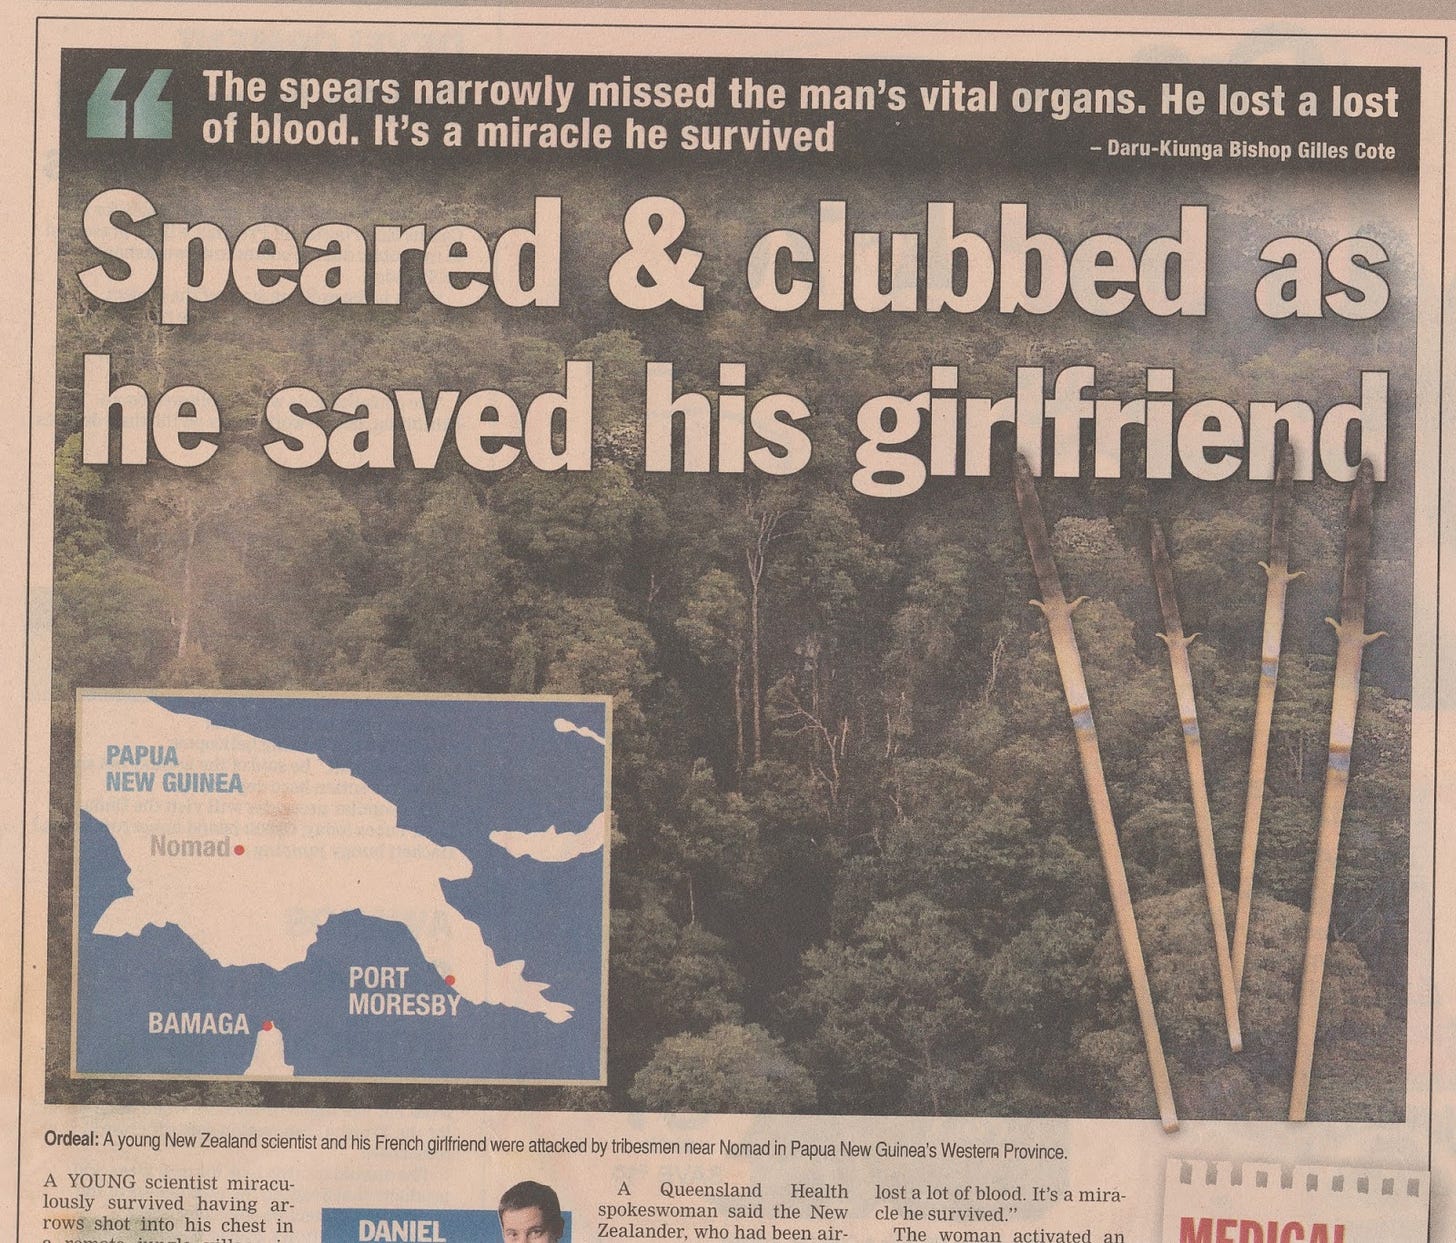 Headline: "Speared and Clubbed as he saved his girlfriend"